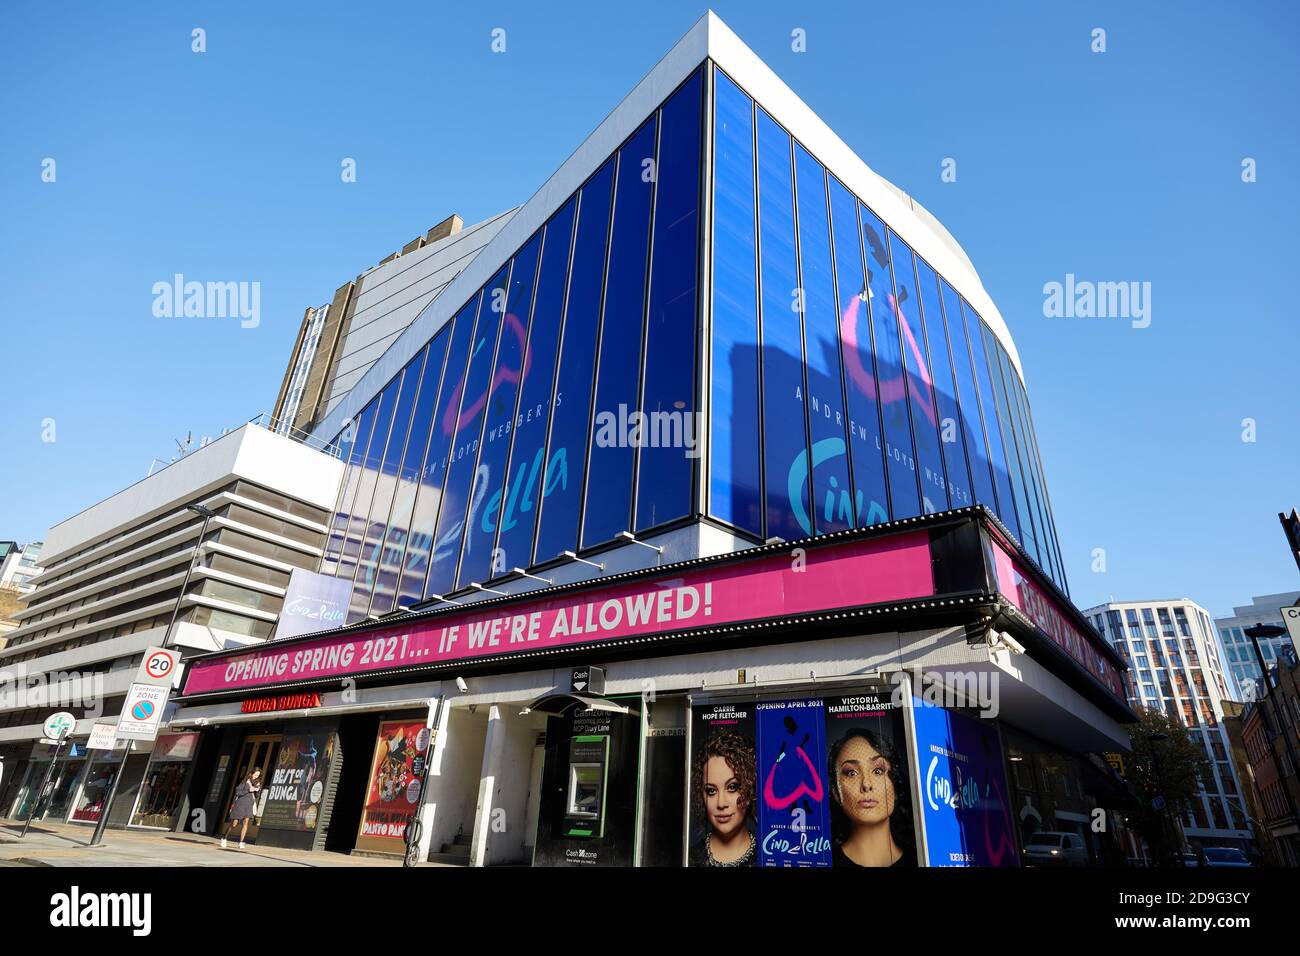 London, UK. - 4 Nov 2020: The exterior of the Gillian Lynne Theatre in Covent Garden advertising Andrew Lloyd Webber’s new musical Cinderella, whose premiere has been delayed until Spring 2021. Stock Photo